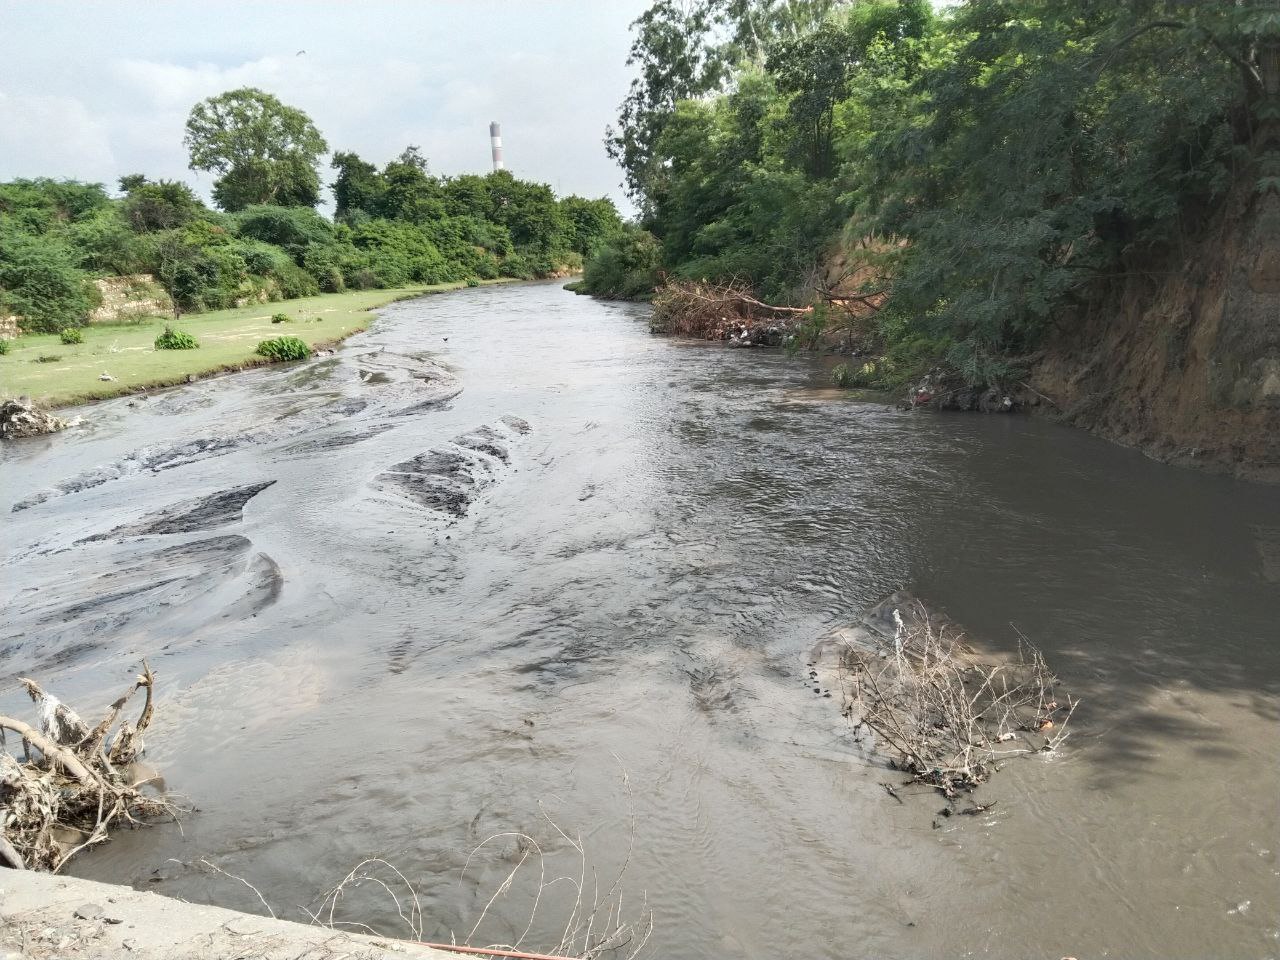 Rivers polluted by coal-fired water from ncl mines, air also poisonous